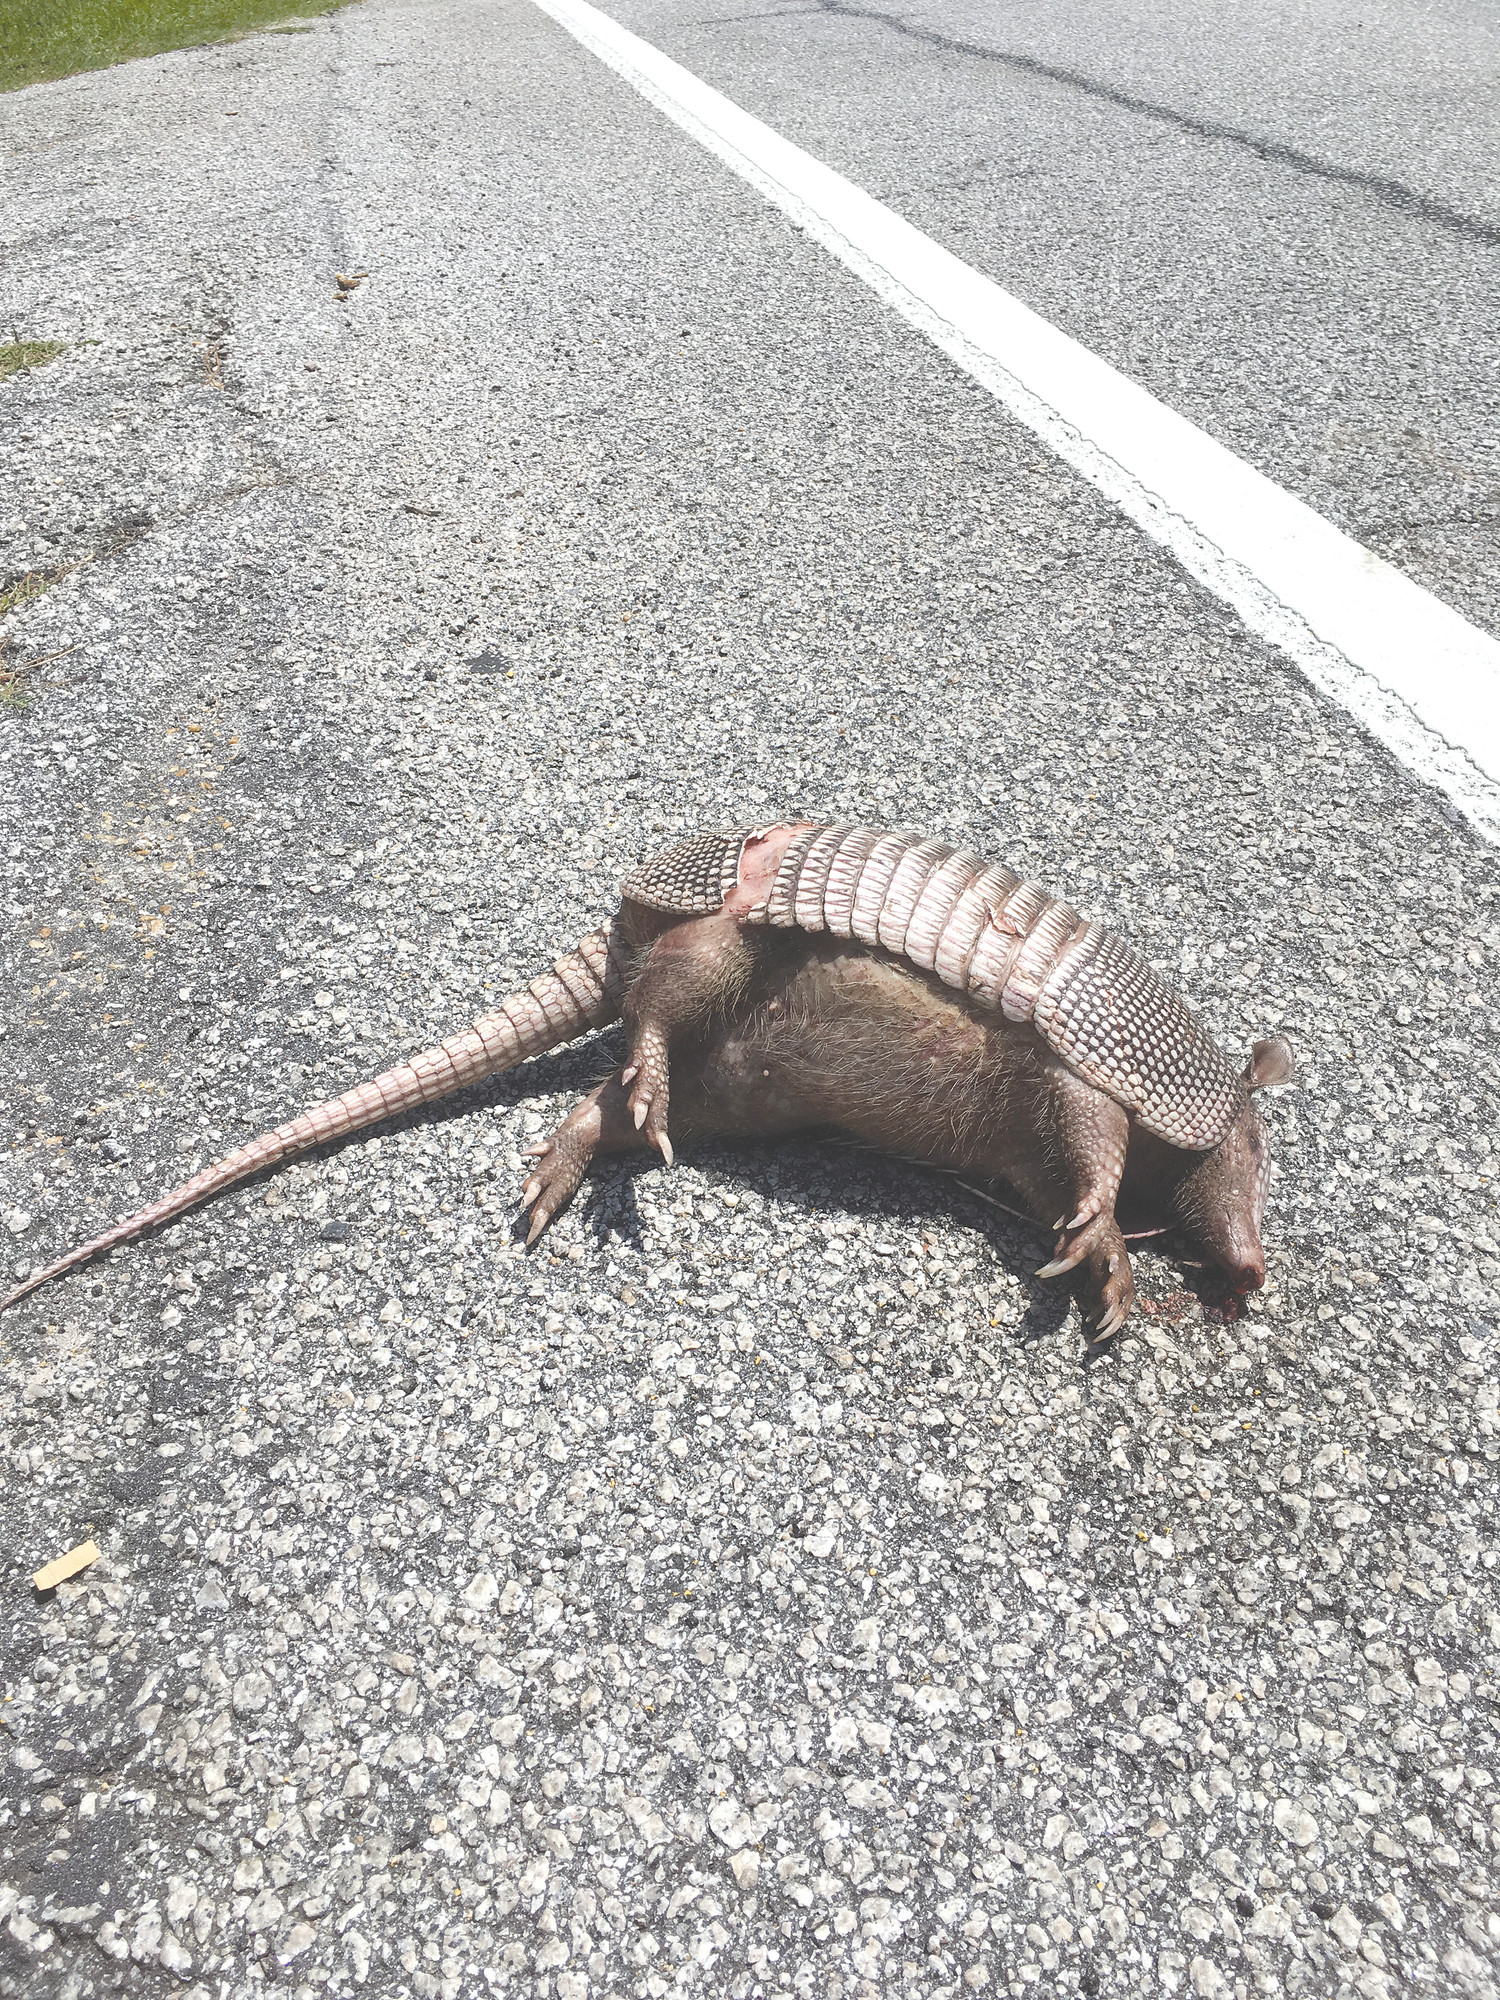 Dan Geddings took this picture this past Tuesday of a roadkill armadillo on Pinewood Road just outside the city limits of Sumter.